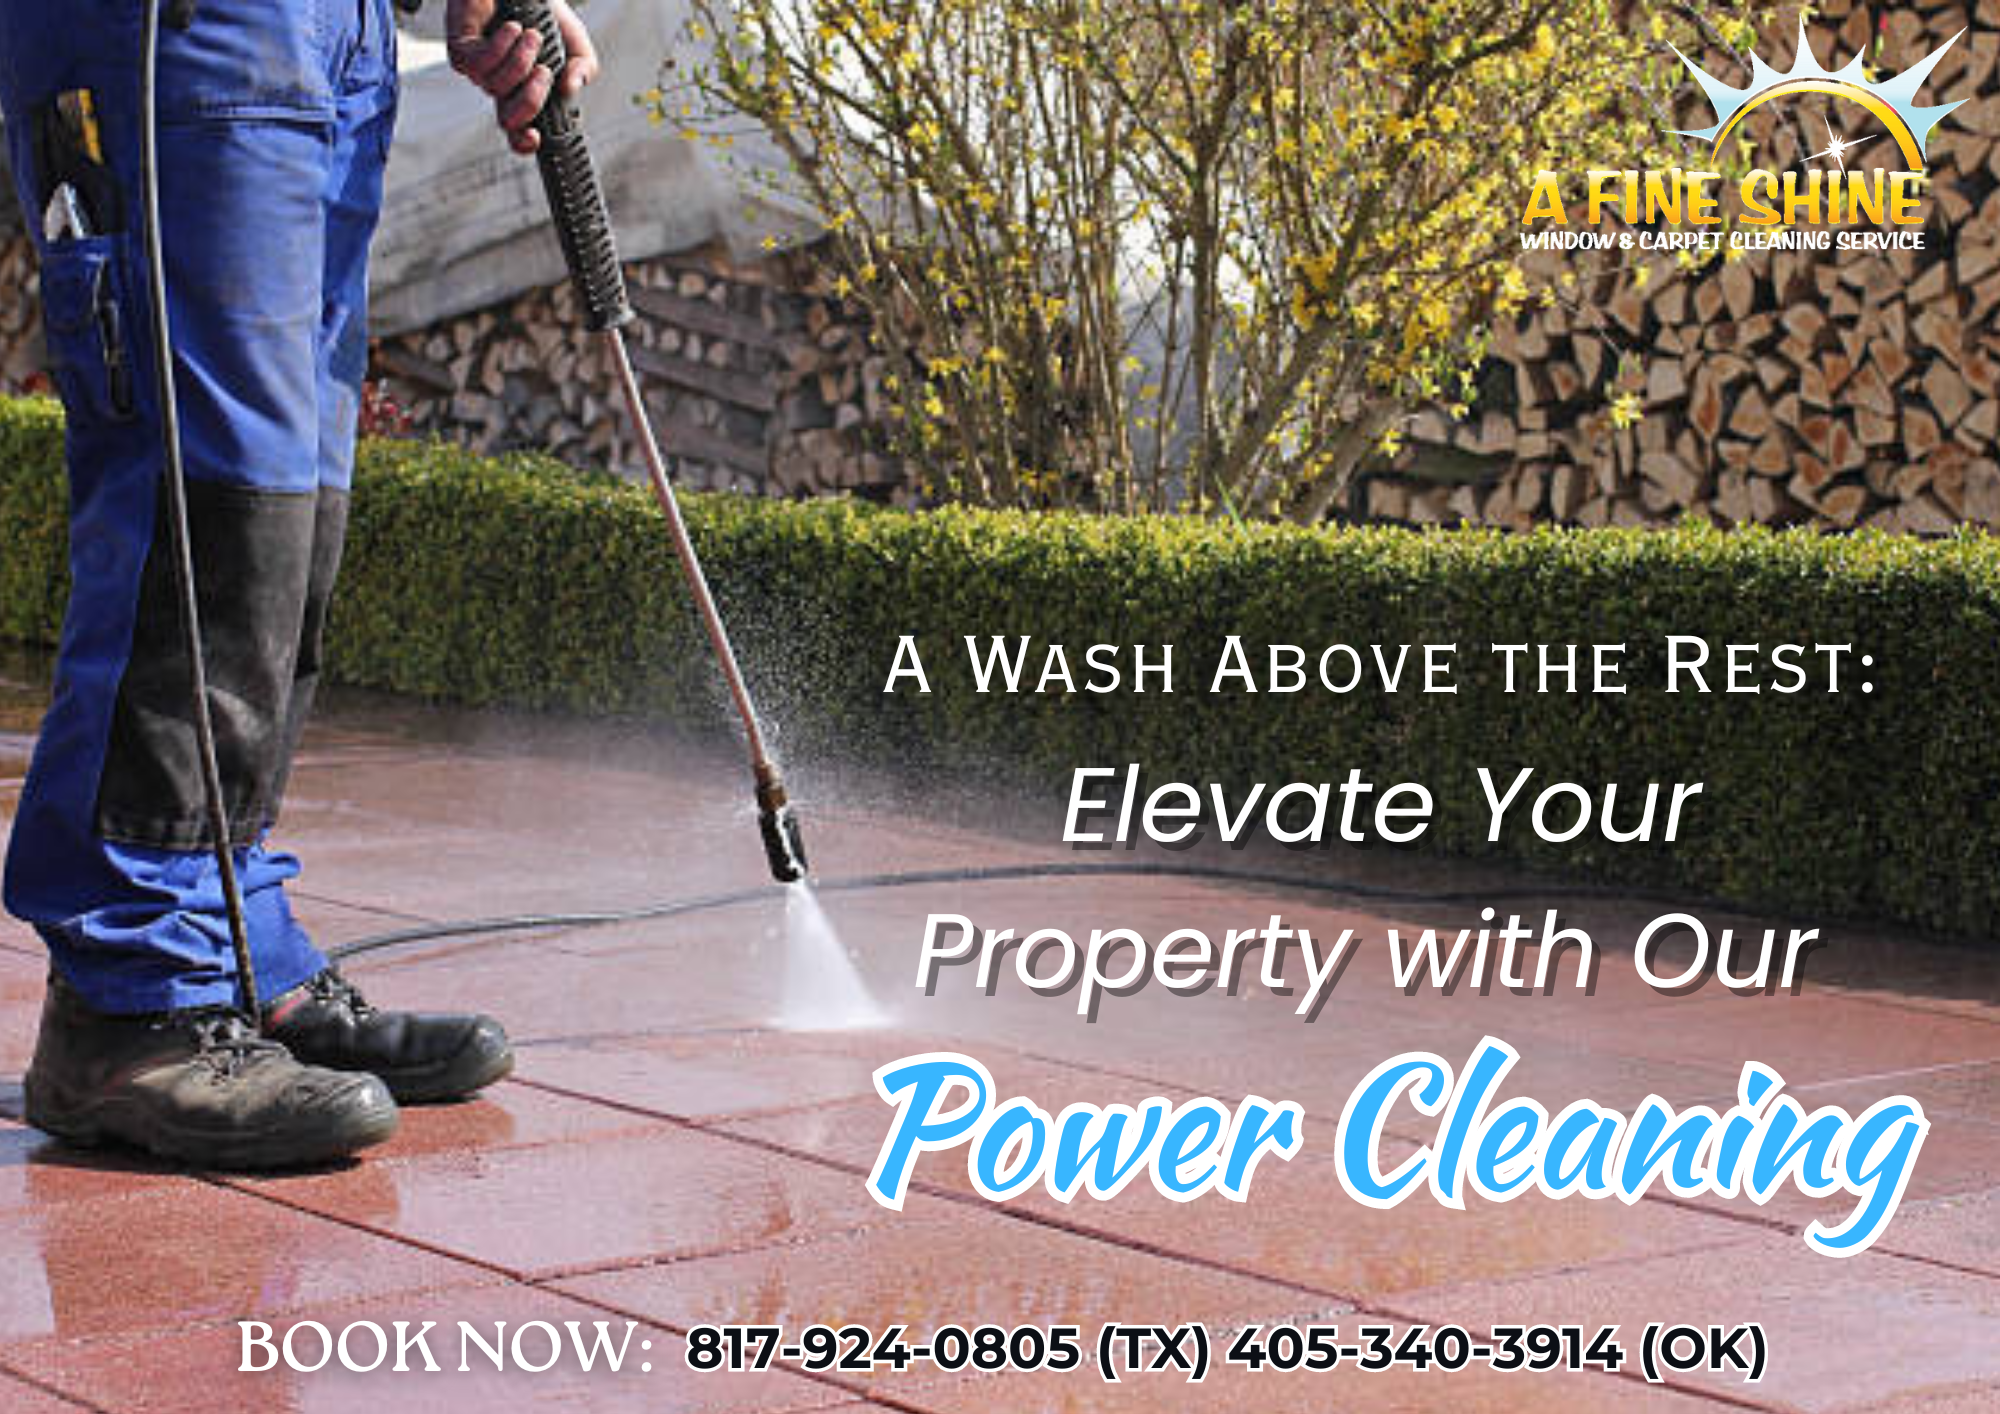 Power cleaning services